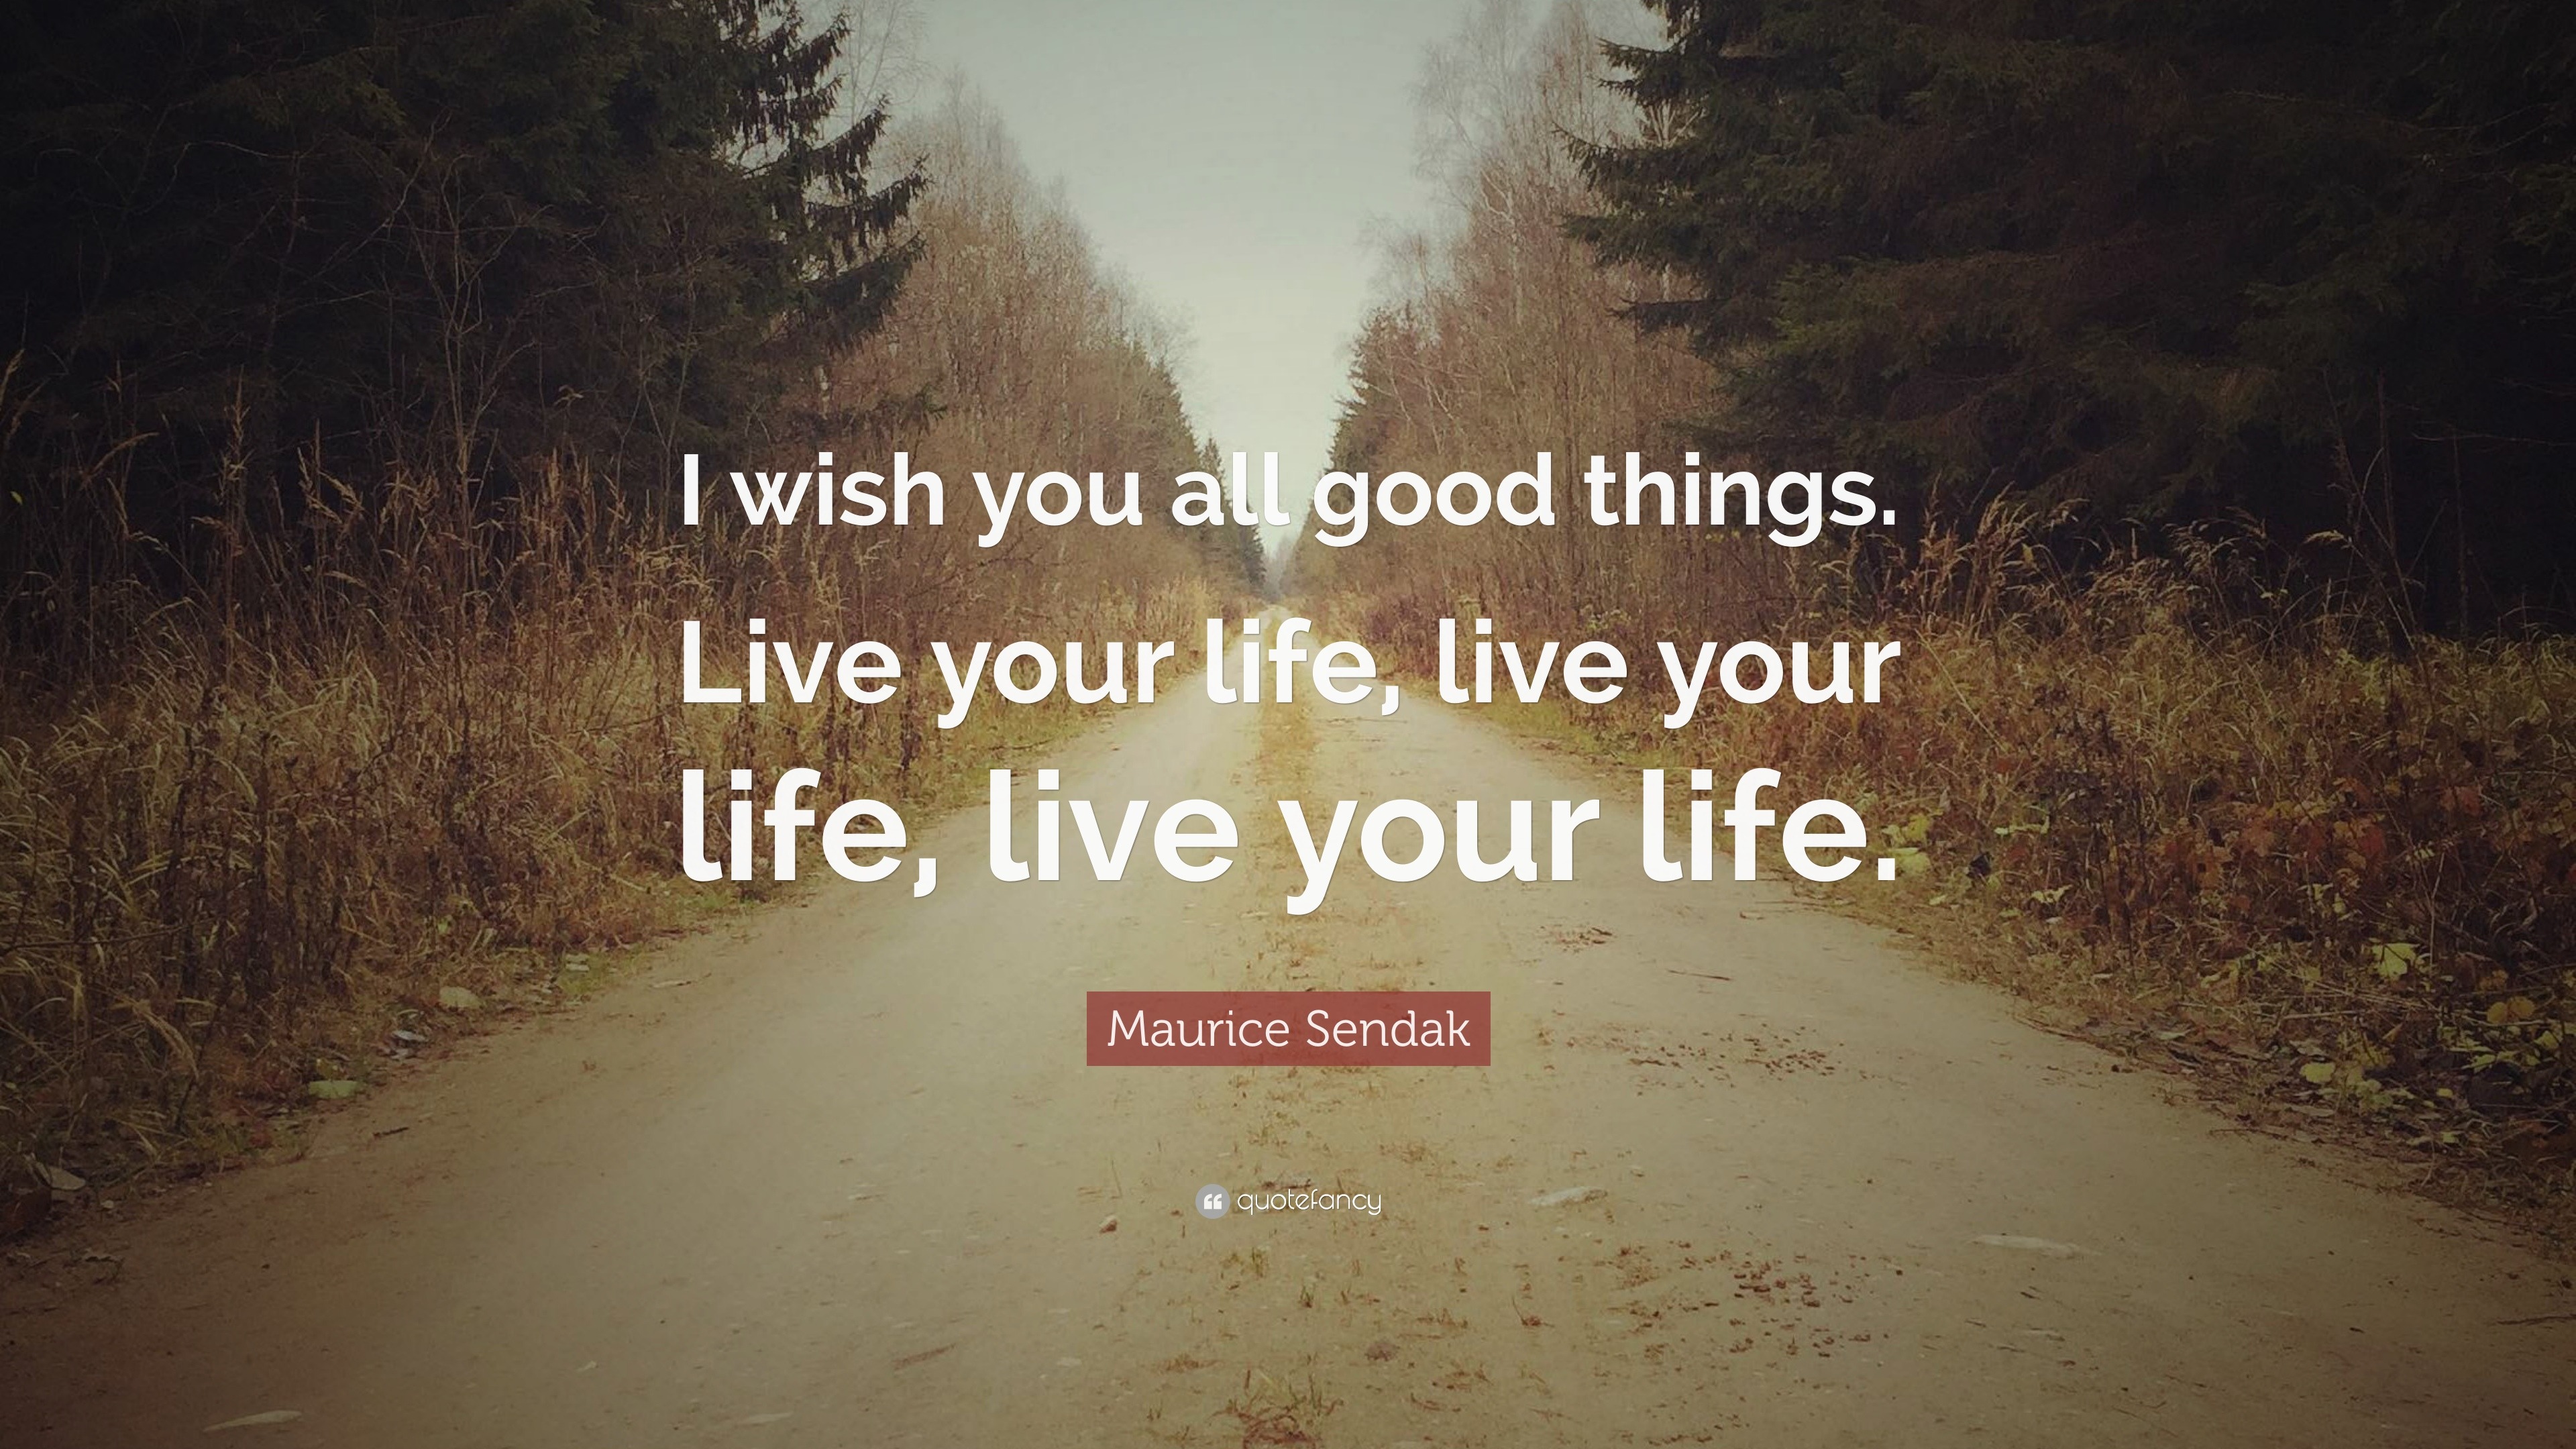 Maurice Sendak Quote “I wish you all good things Live your life